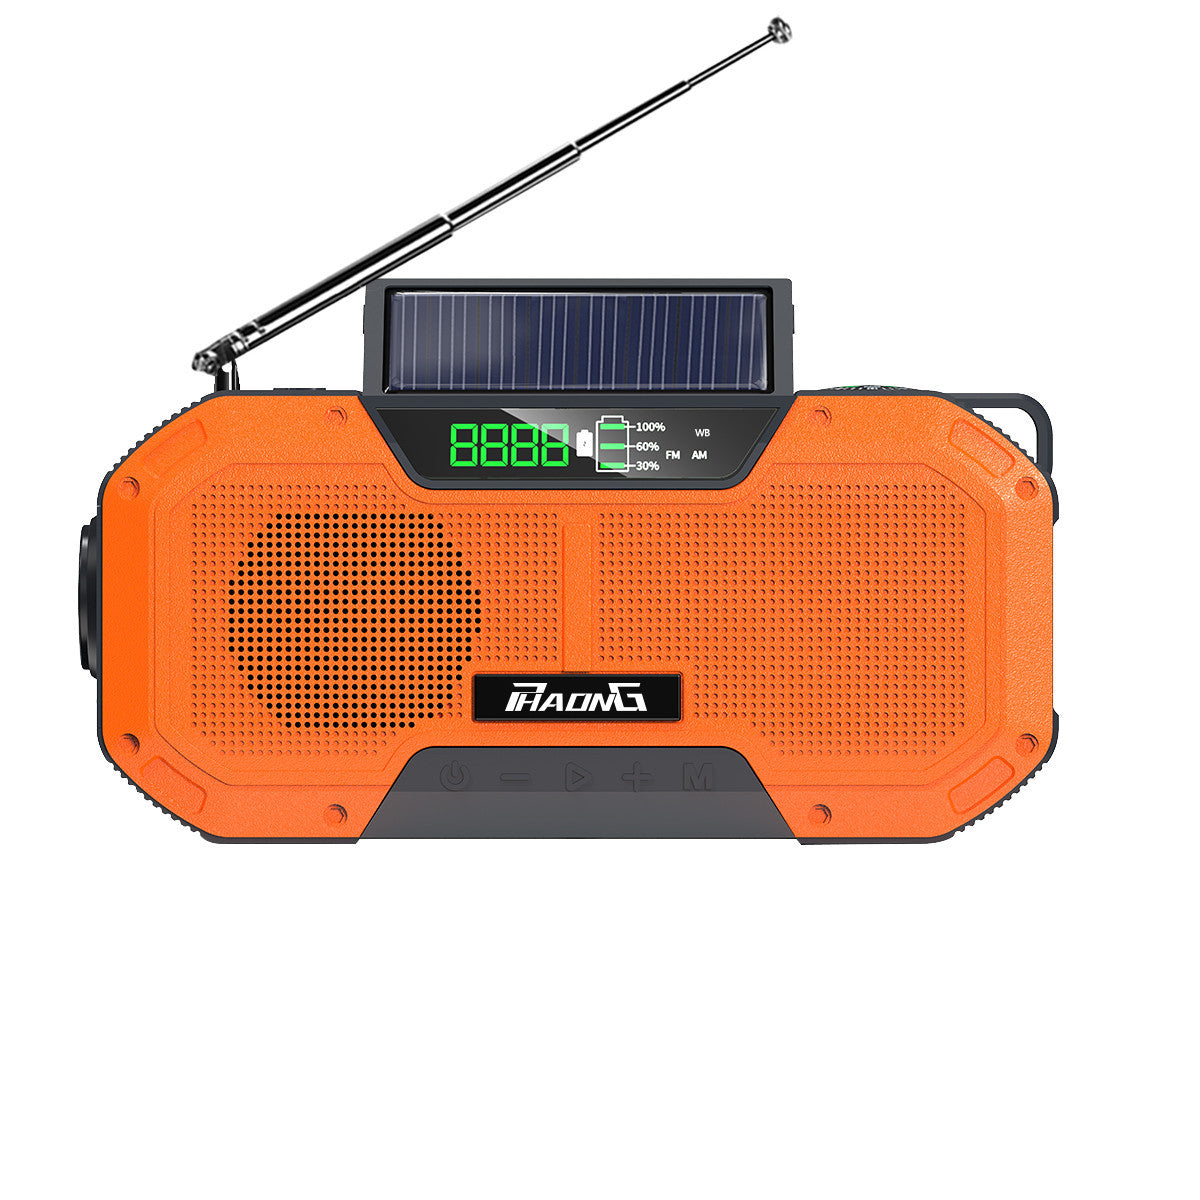 This solar powered emergency radio has a Bluetooth speaker, strong flashlight and several mobile phone charger plugs.  This is great for your emergency kits, camping kits and can provide much needed solar power when electricity isn't available due to an emergency situation.